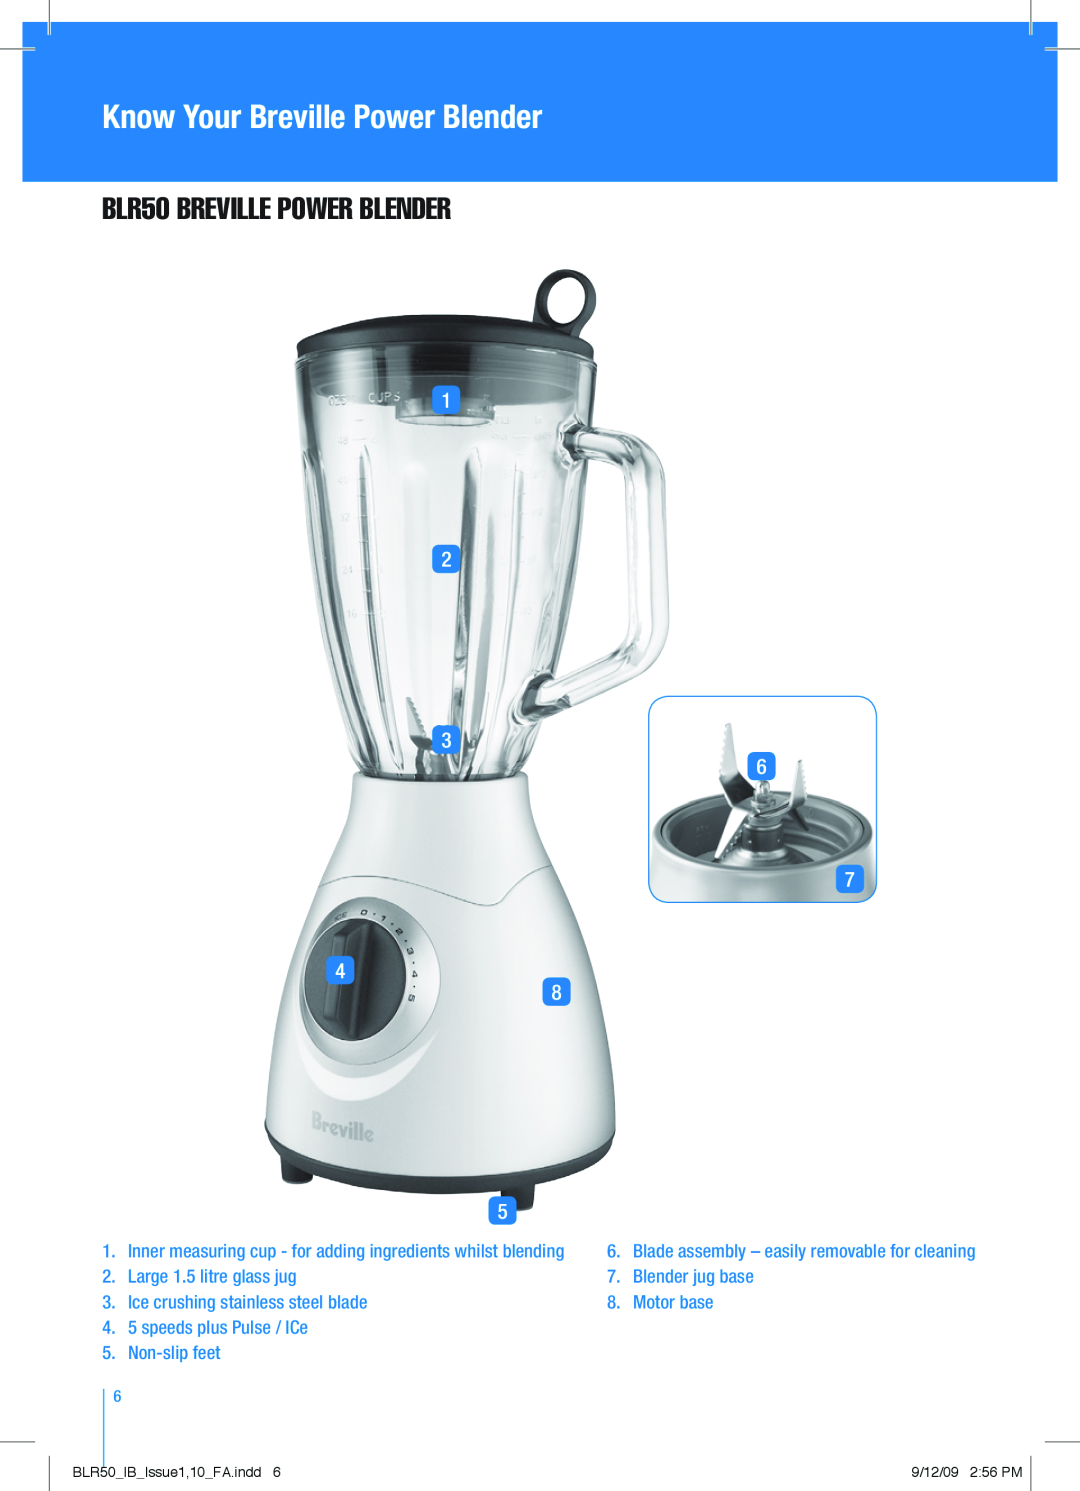 Breville manual Know Your Breville Power Blender, blr50 breville power blender, BLR50IBIssue1,10FA.indd, 9/12/09 256 PM 